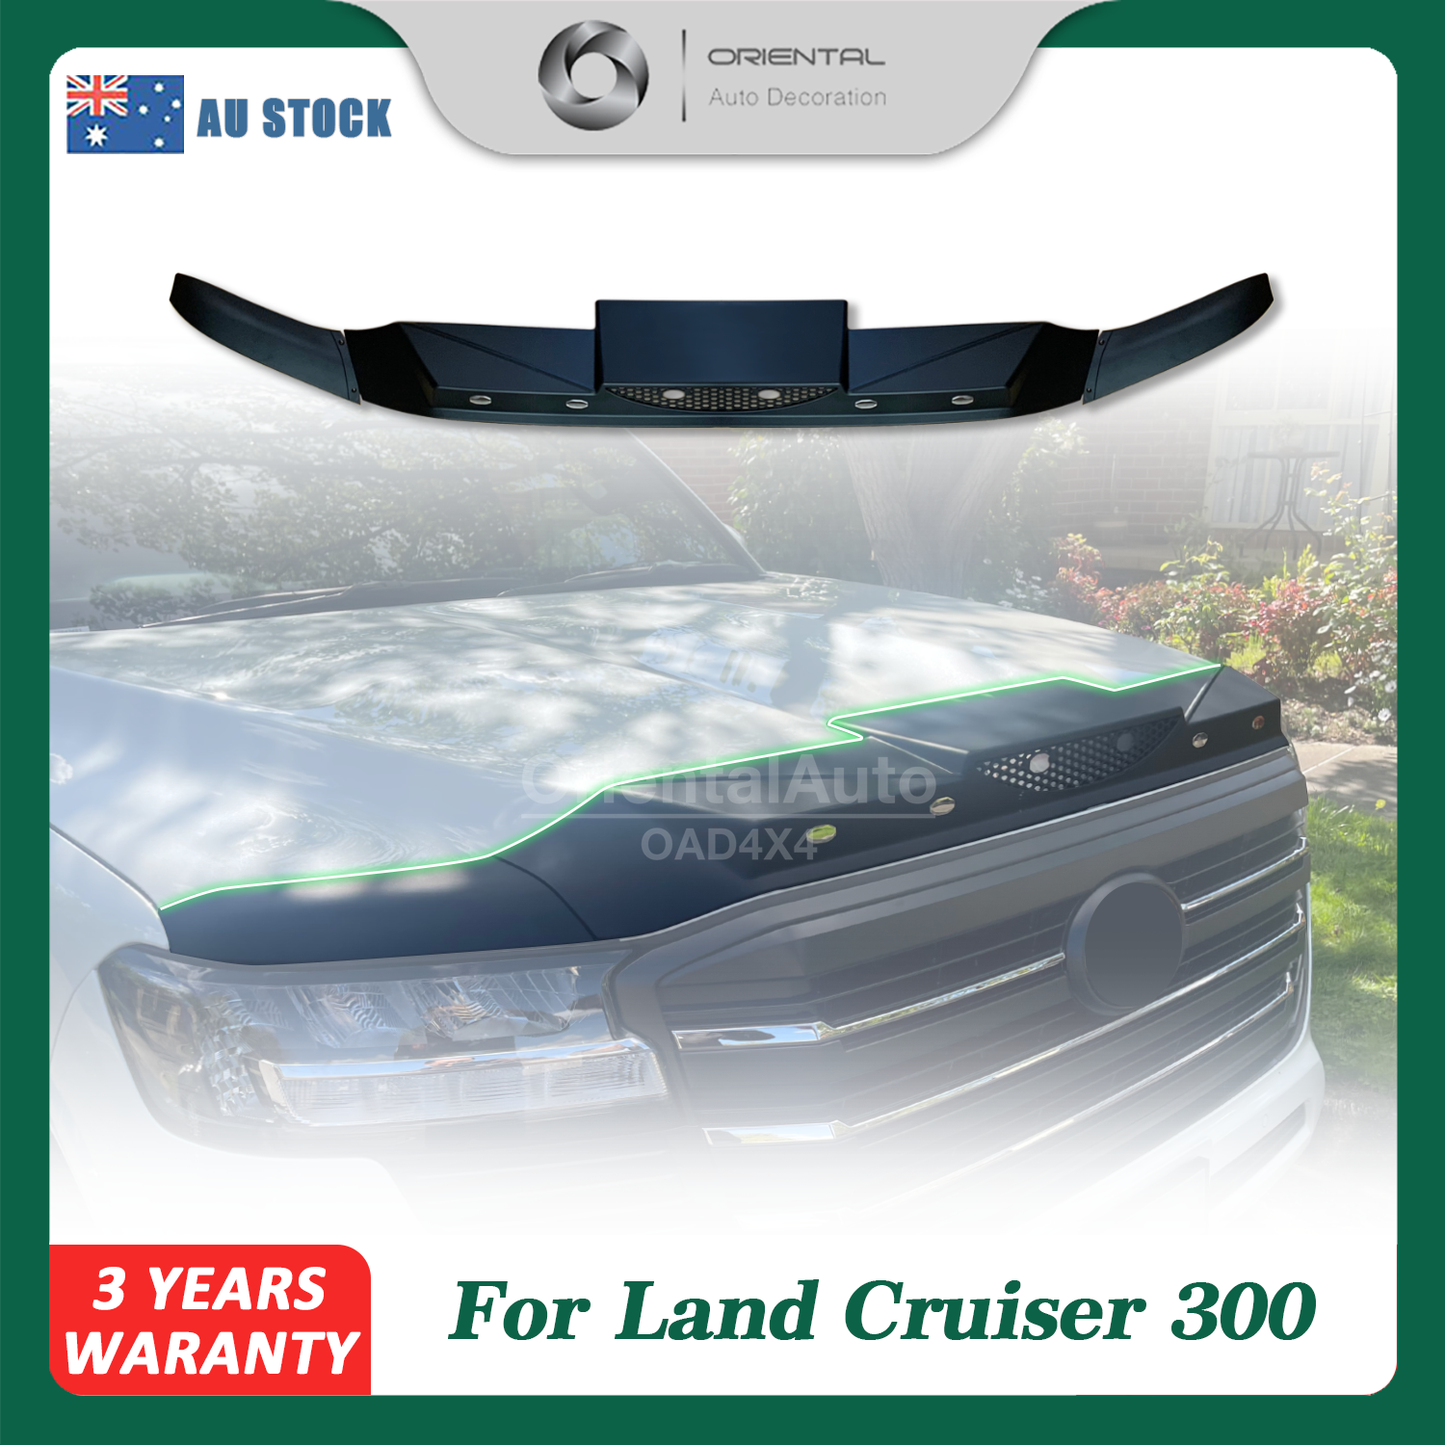 Injection Modeling Exclusive Bonnet Protector for Toyota Landcruiser 300 Land Cruiser 300 LC300 2021-Onwards Hood Protector Bonnet Guard